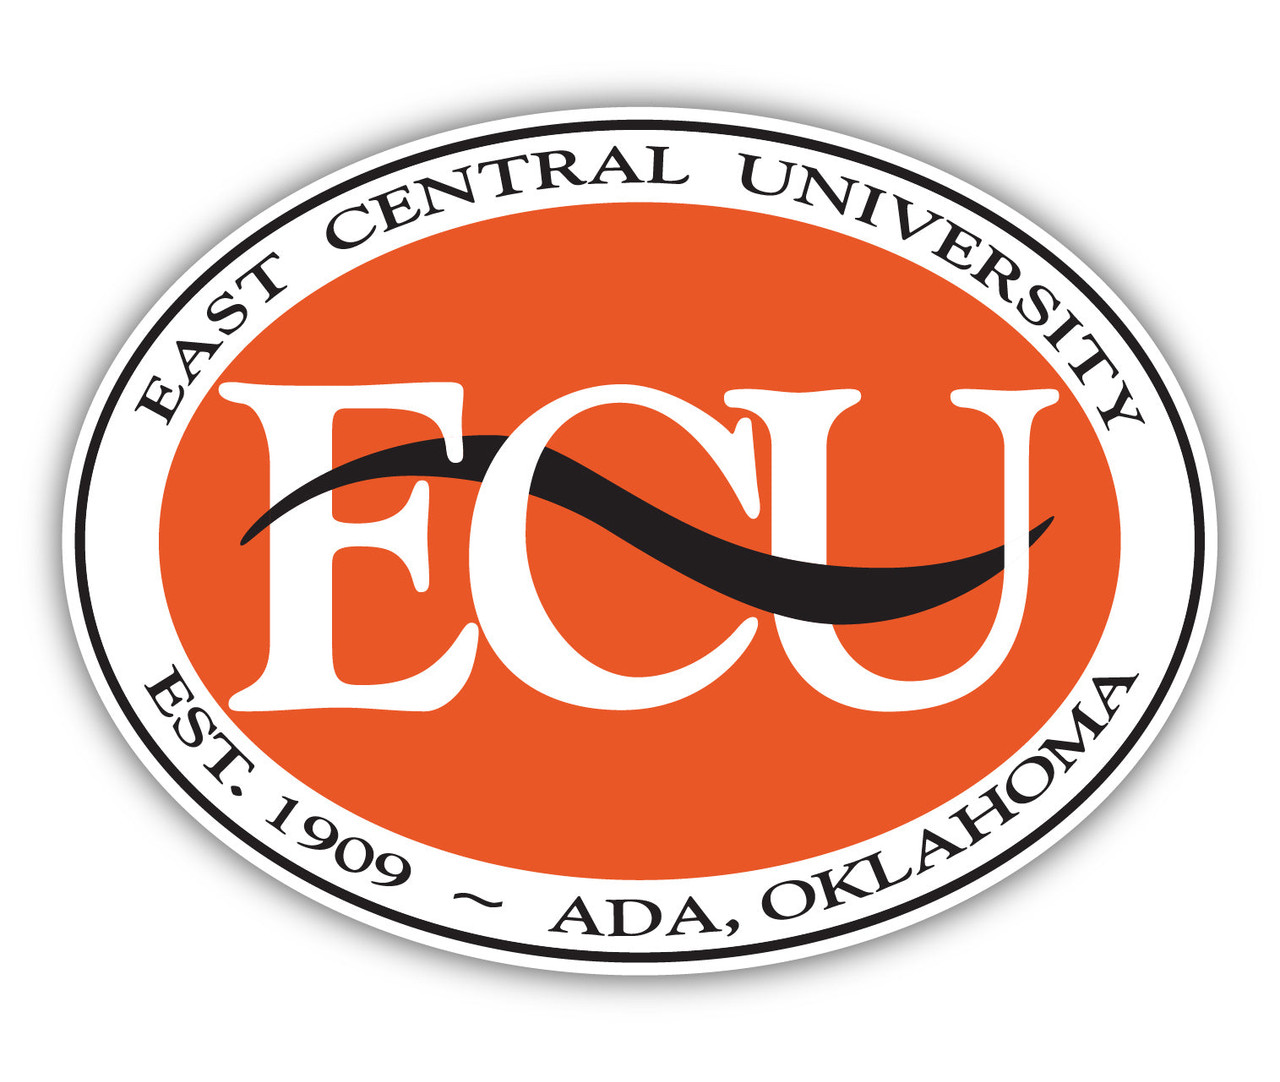 East Central University Tigers 2 Inch Vinyl Decal Sticker